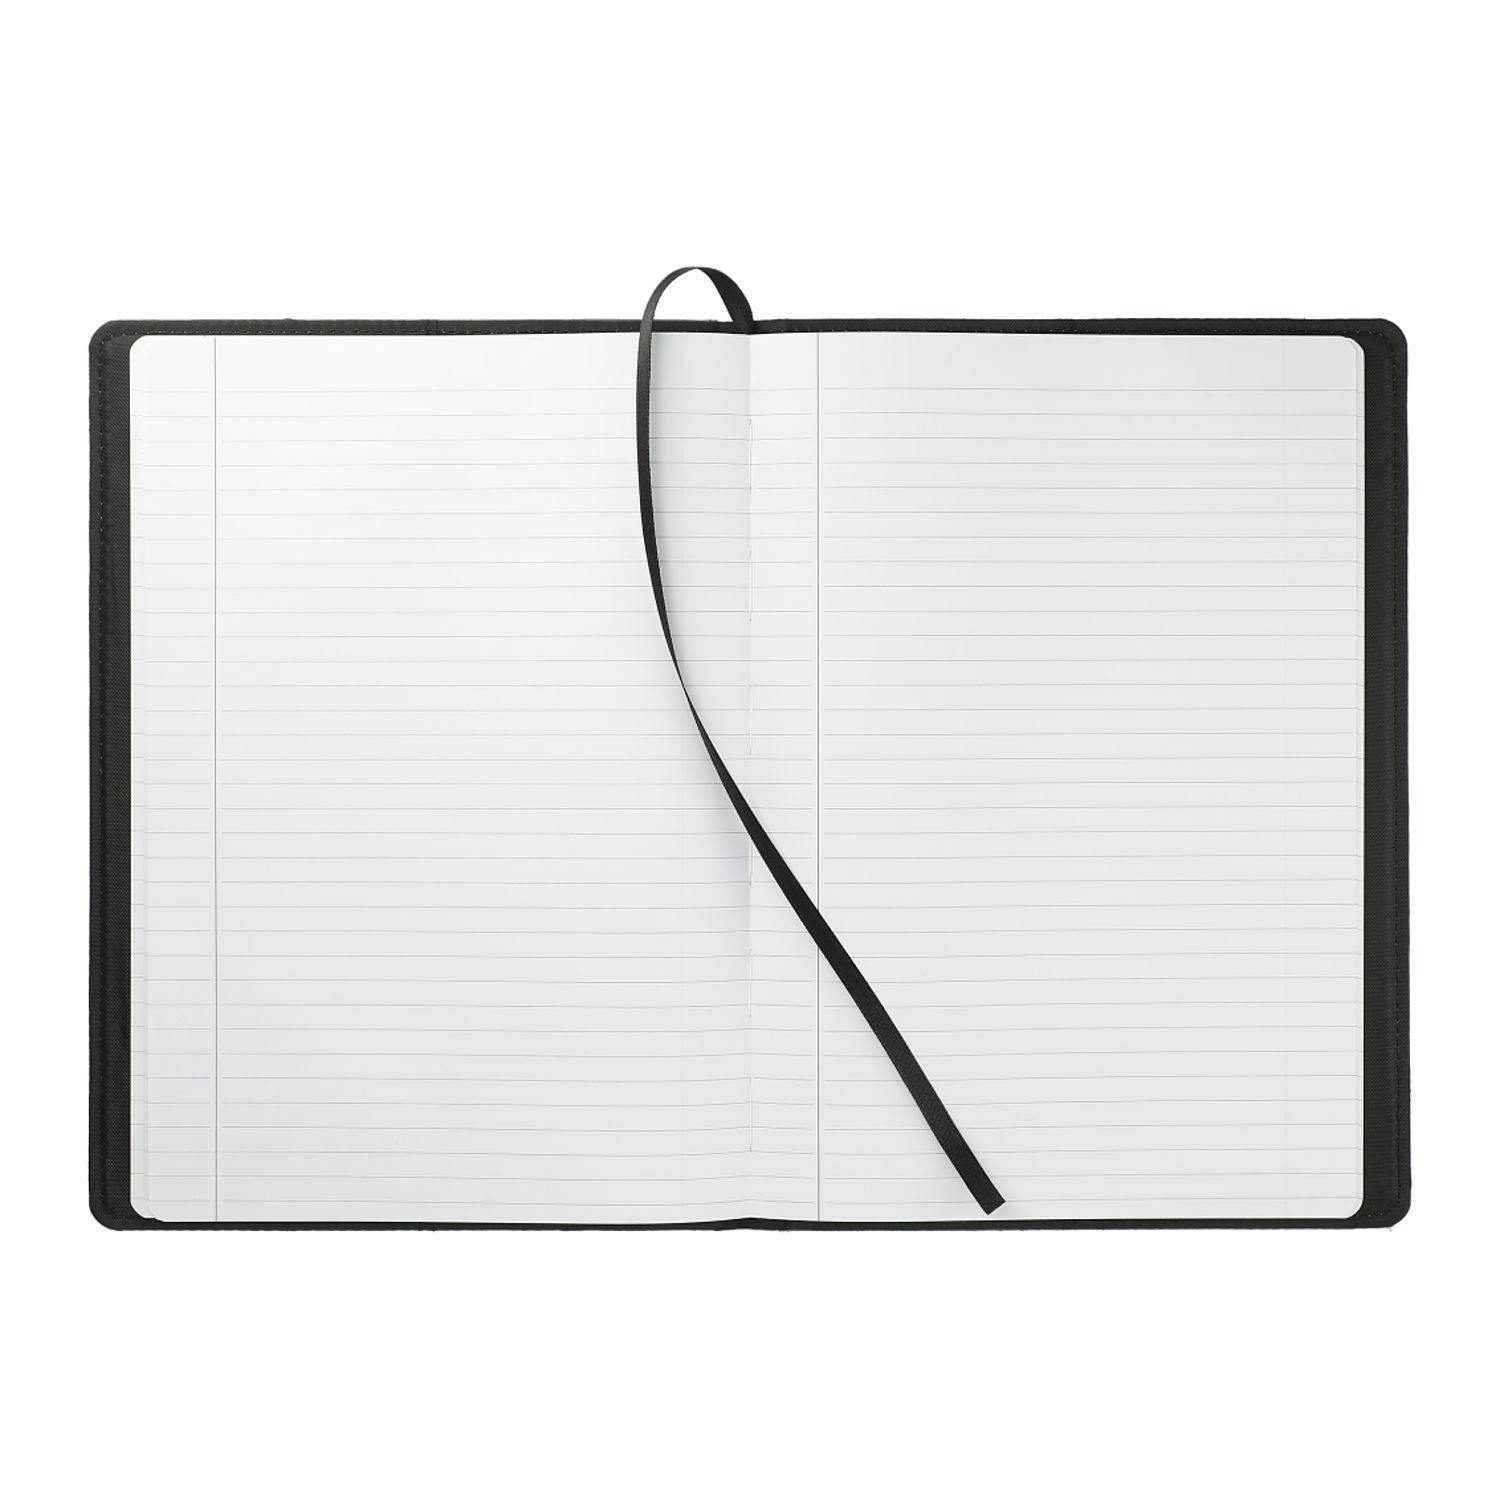 7" x 10" Reclaim RPET Refillable JournalBook® - additional Image 2